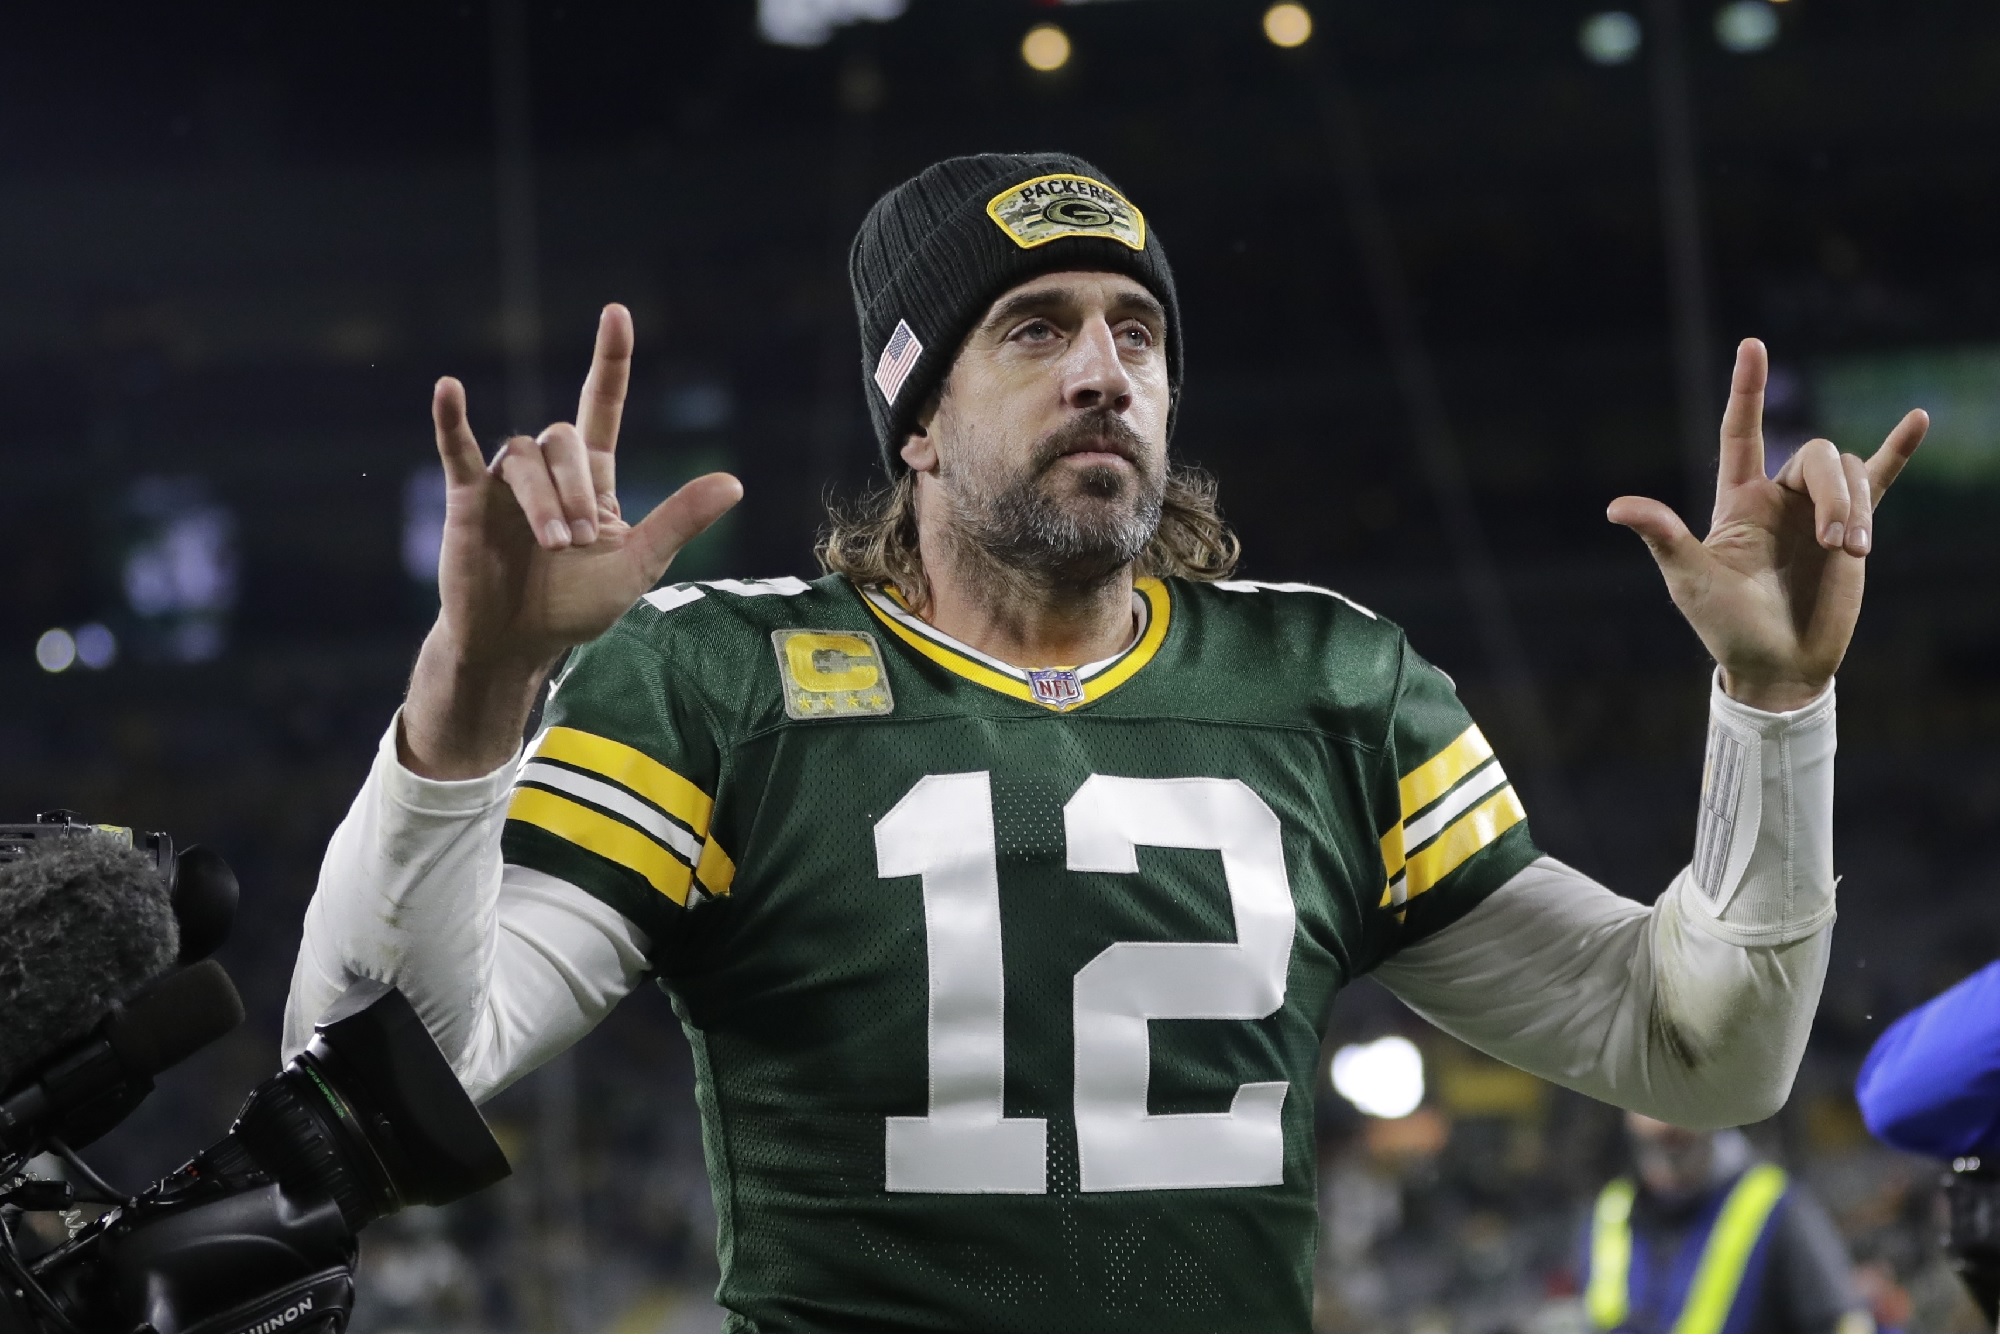 ‘I Have Given My Life to This Game’: Is Aaron Rodgers’ Retirement Close?